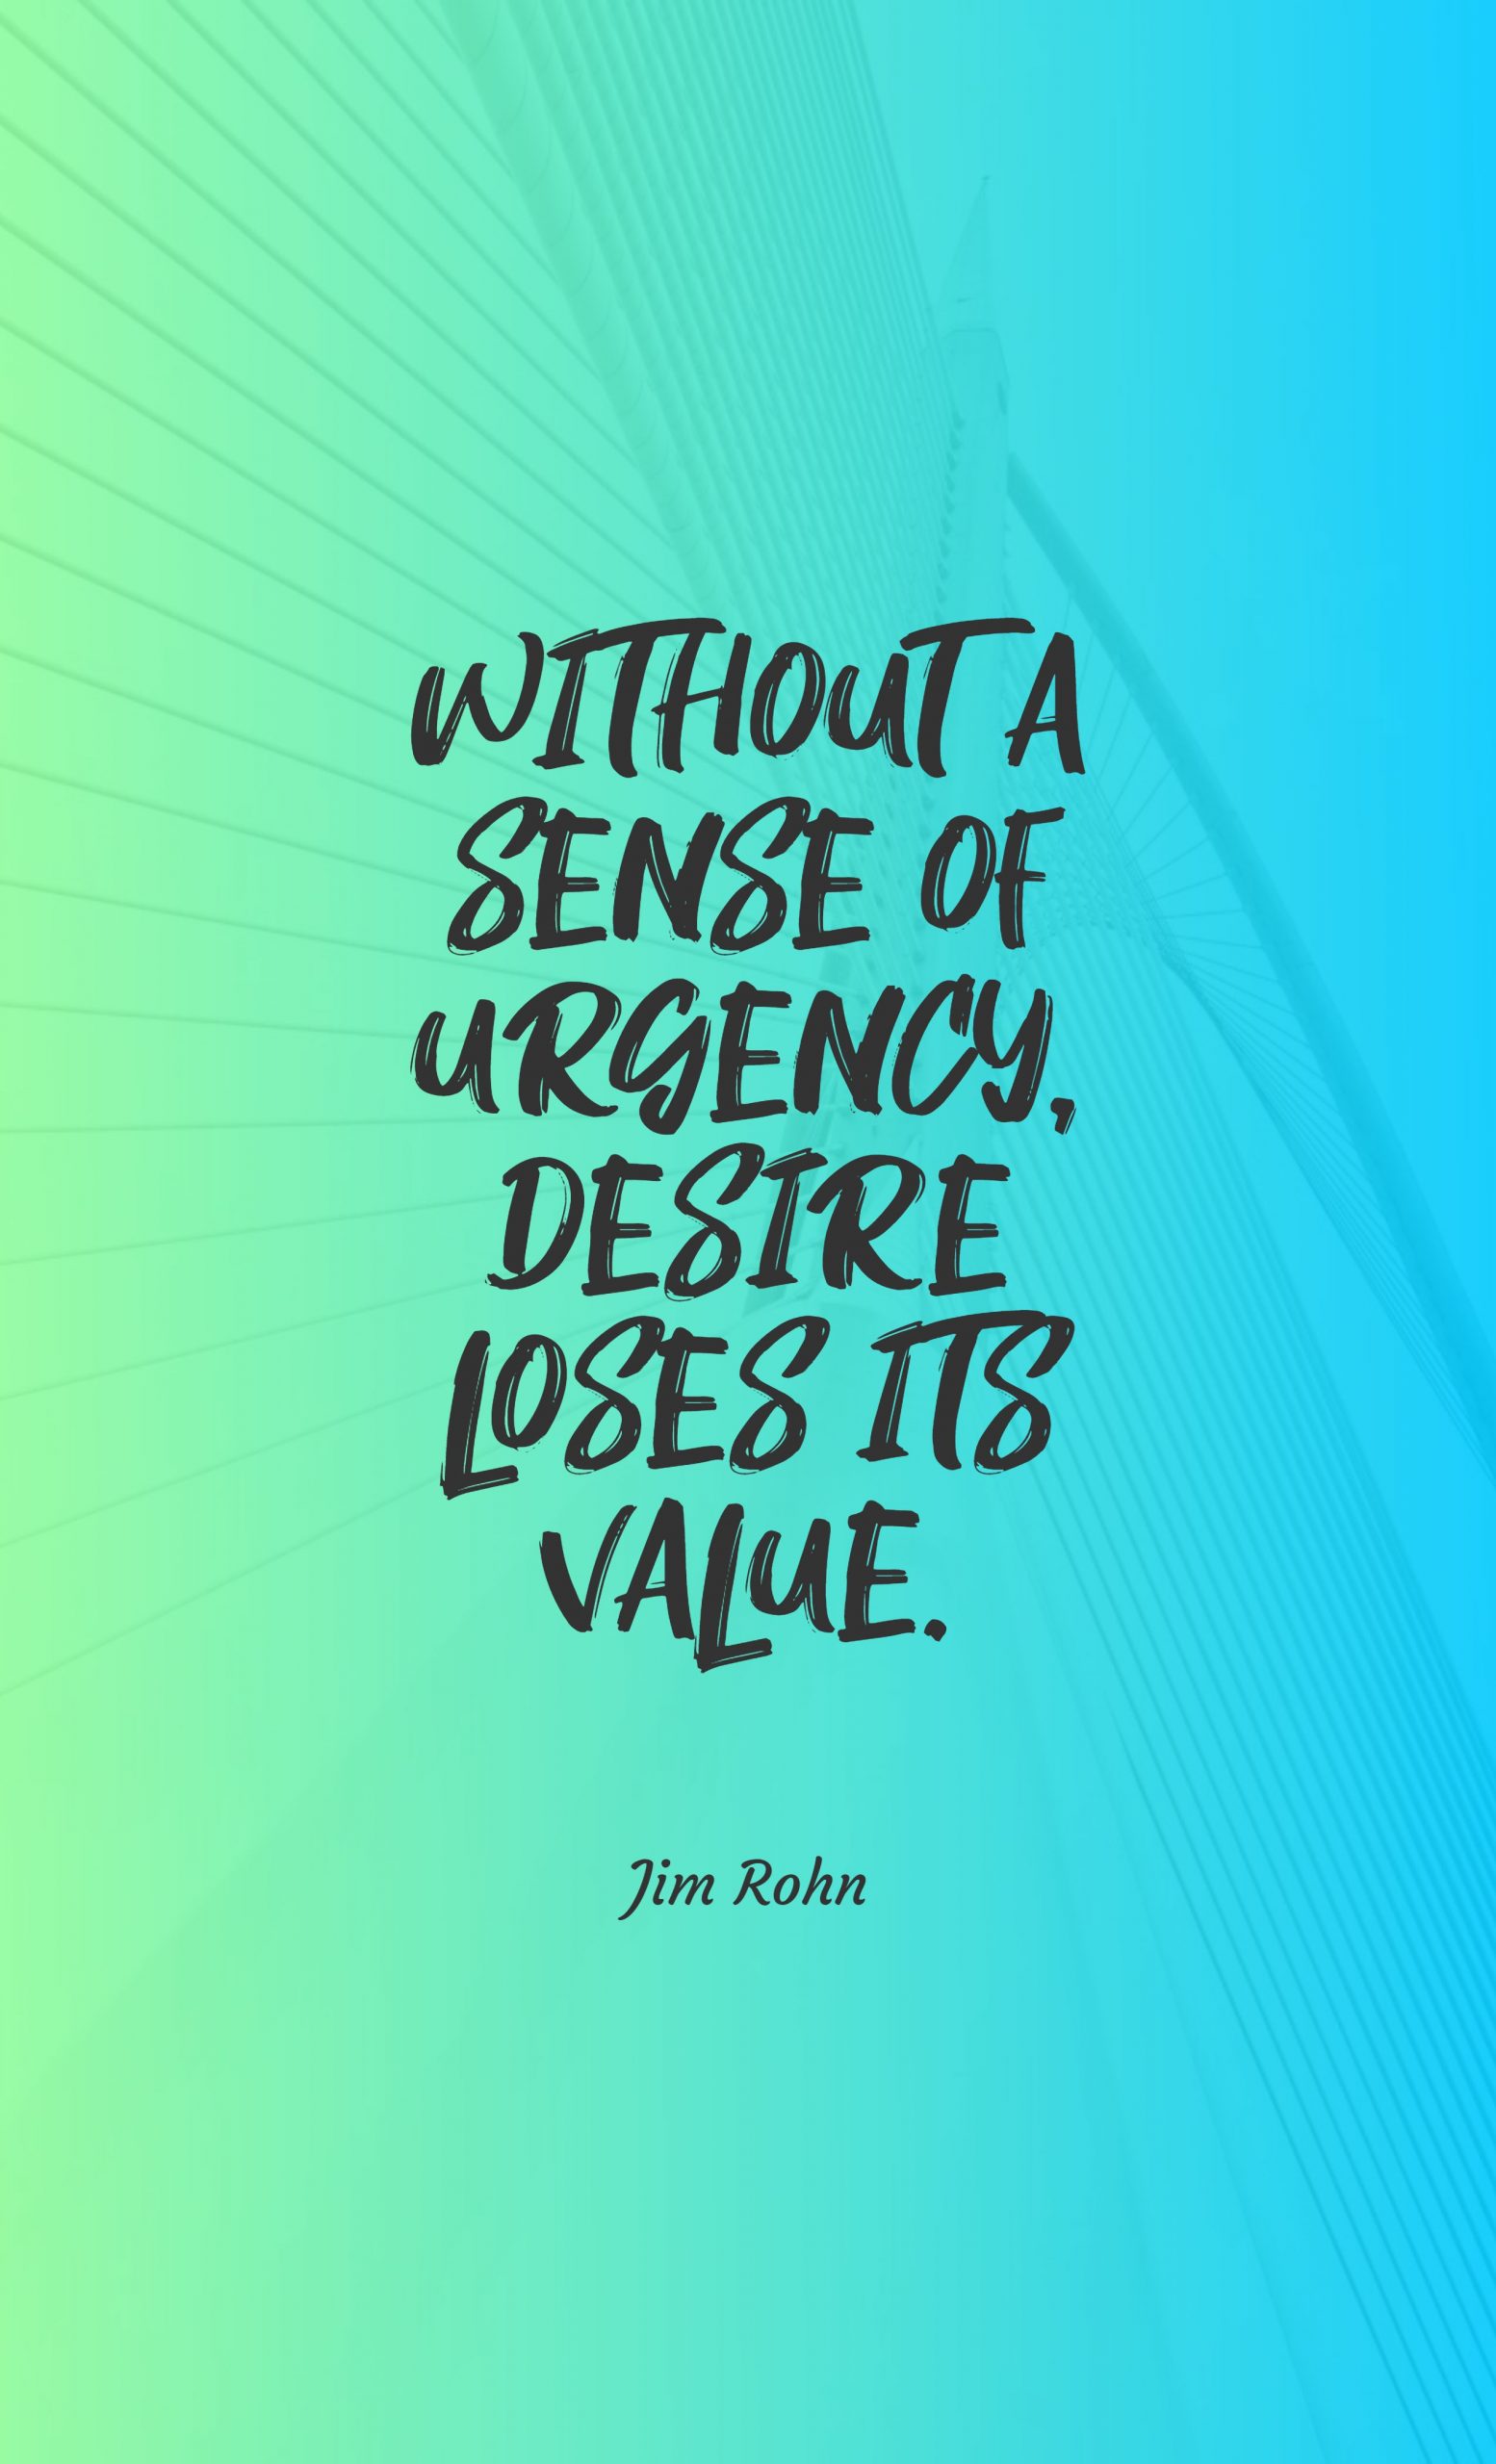 Jim Rohn’s quotes about sense of urgency